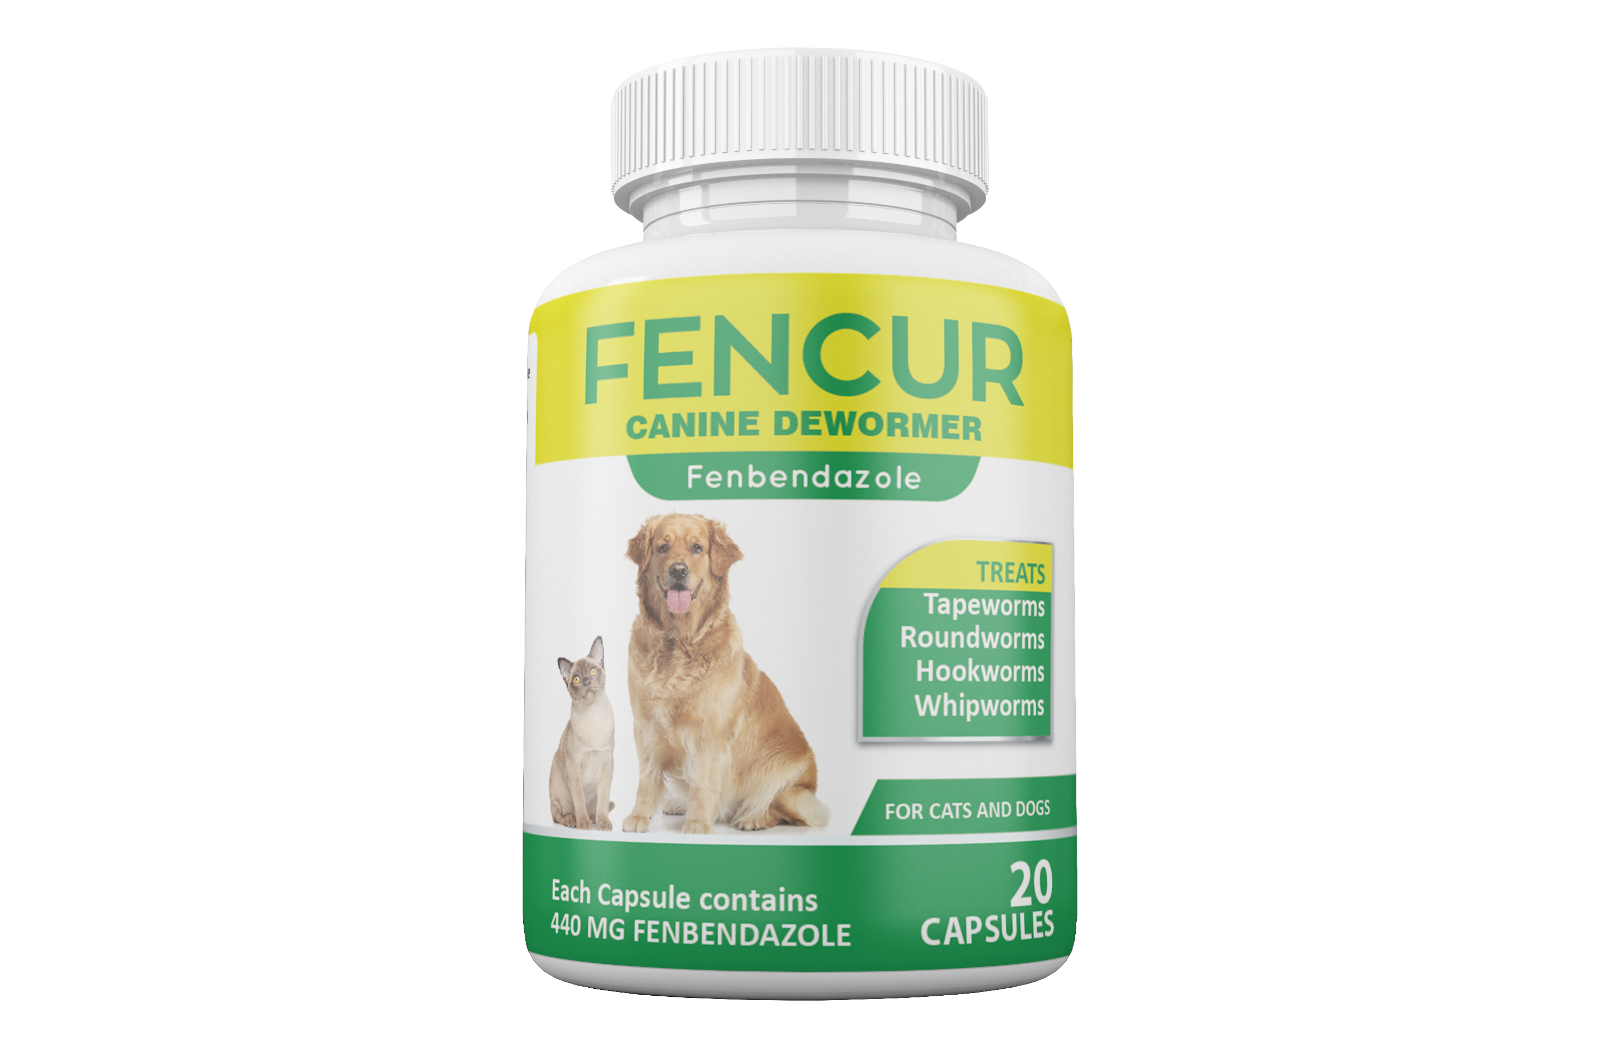 Fencur Dewormer 20 Caps Tapeworm for Dogs and Cats Generic Safeguard